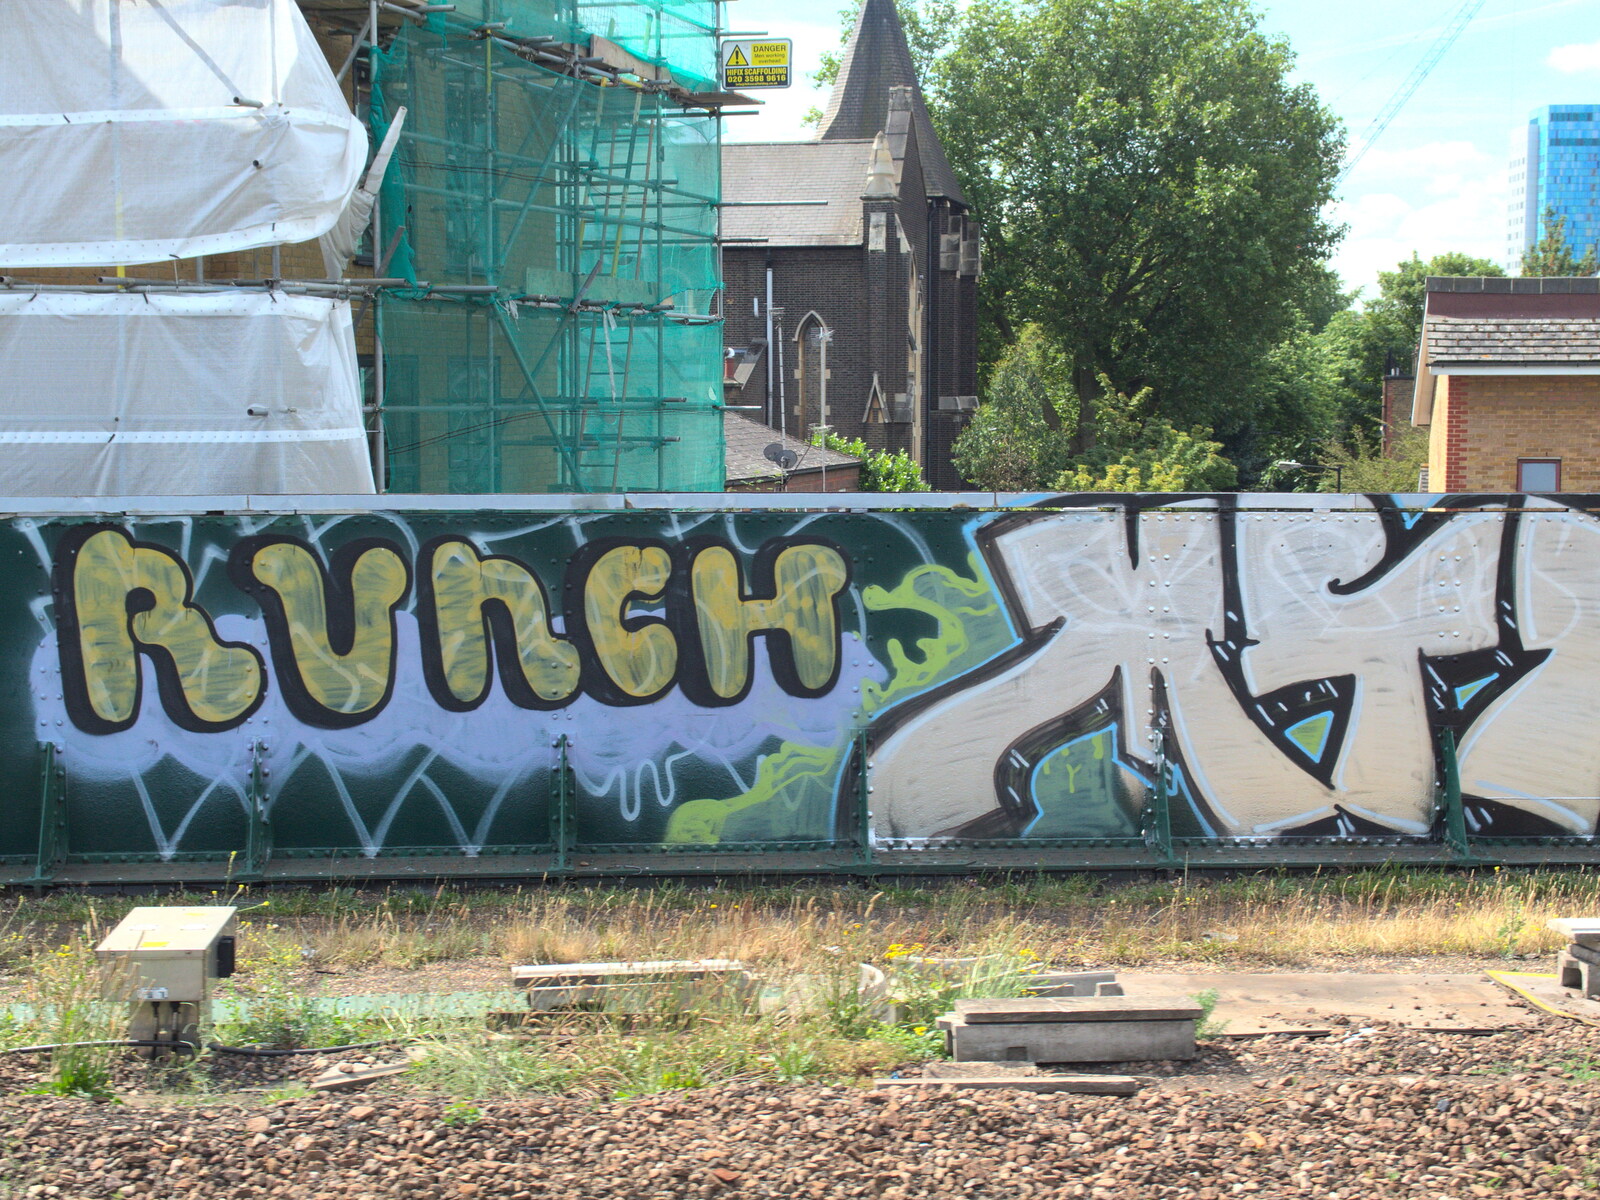 Runch graffiti from A Trip to Pizza Pub, Great Suffolk Street, Southwark - 8th July 2014